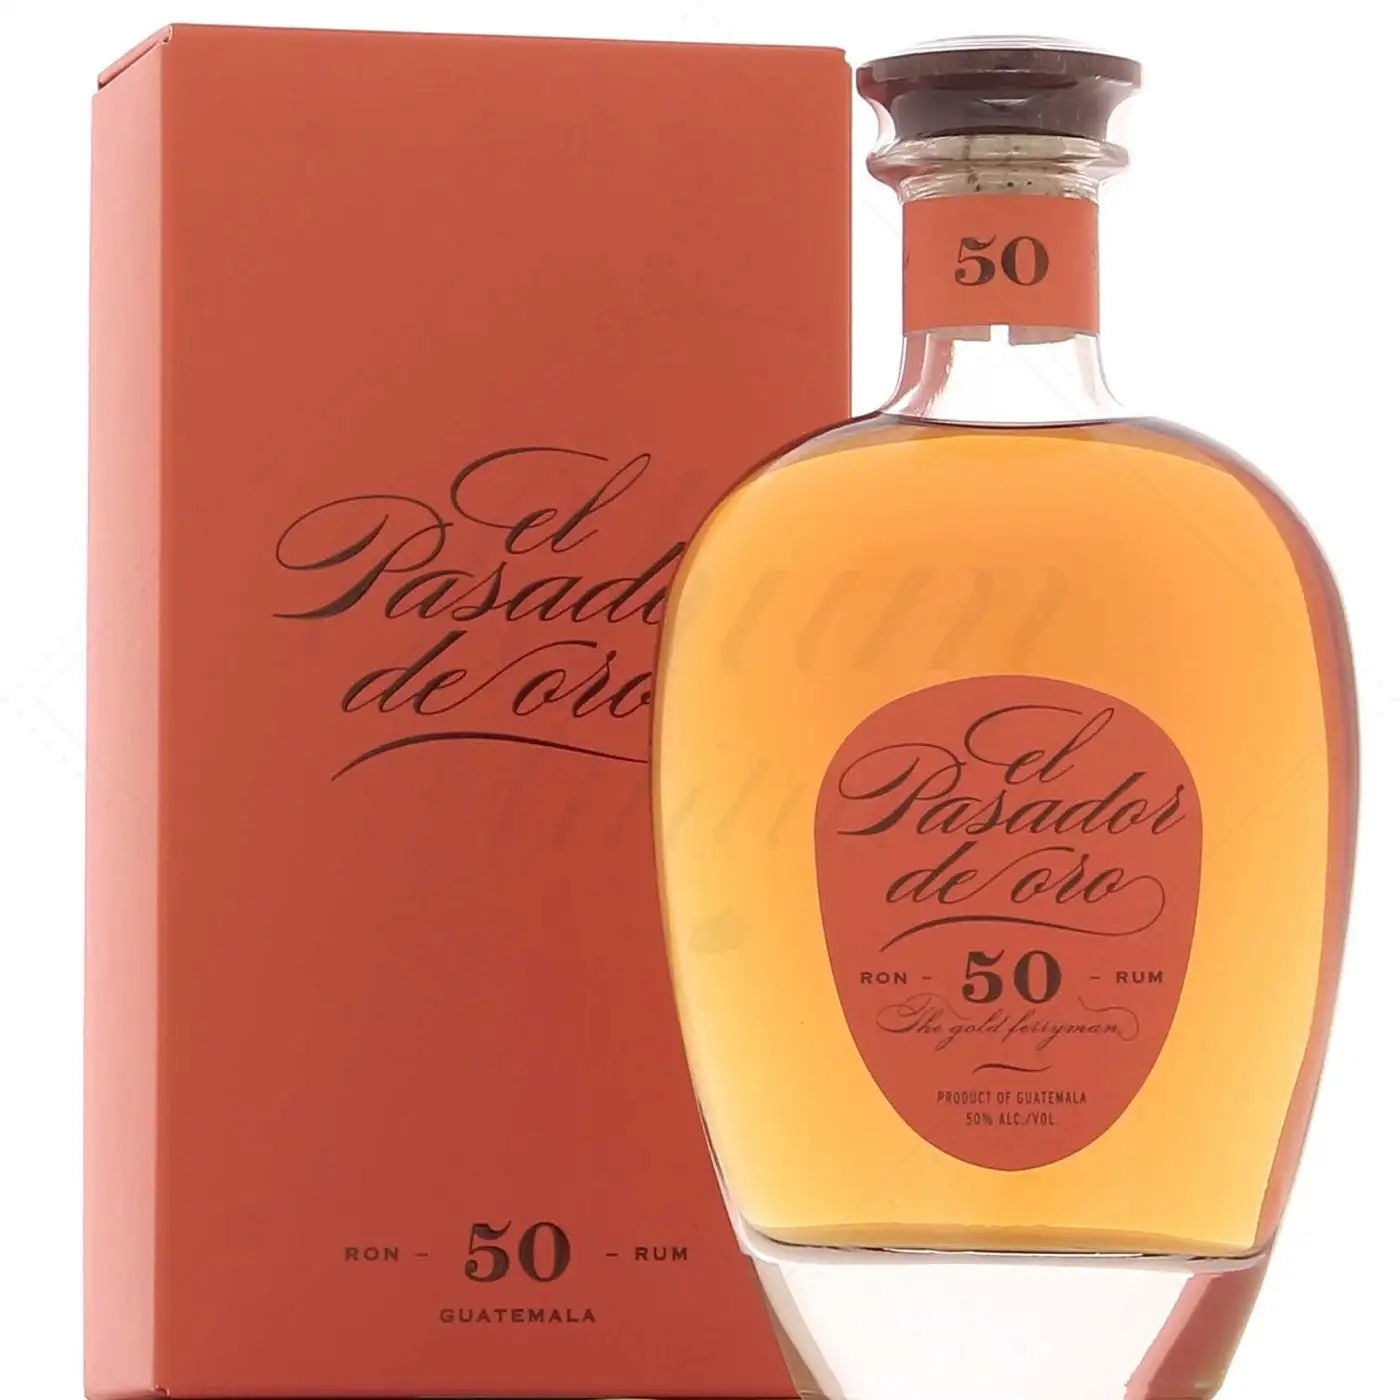 Image of the front of the bottle of the rum El Pasador Ron - 50 - Rum